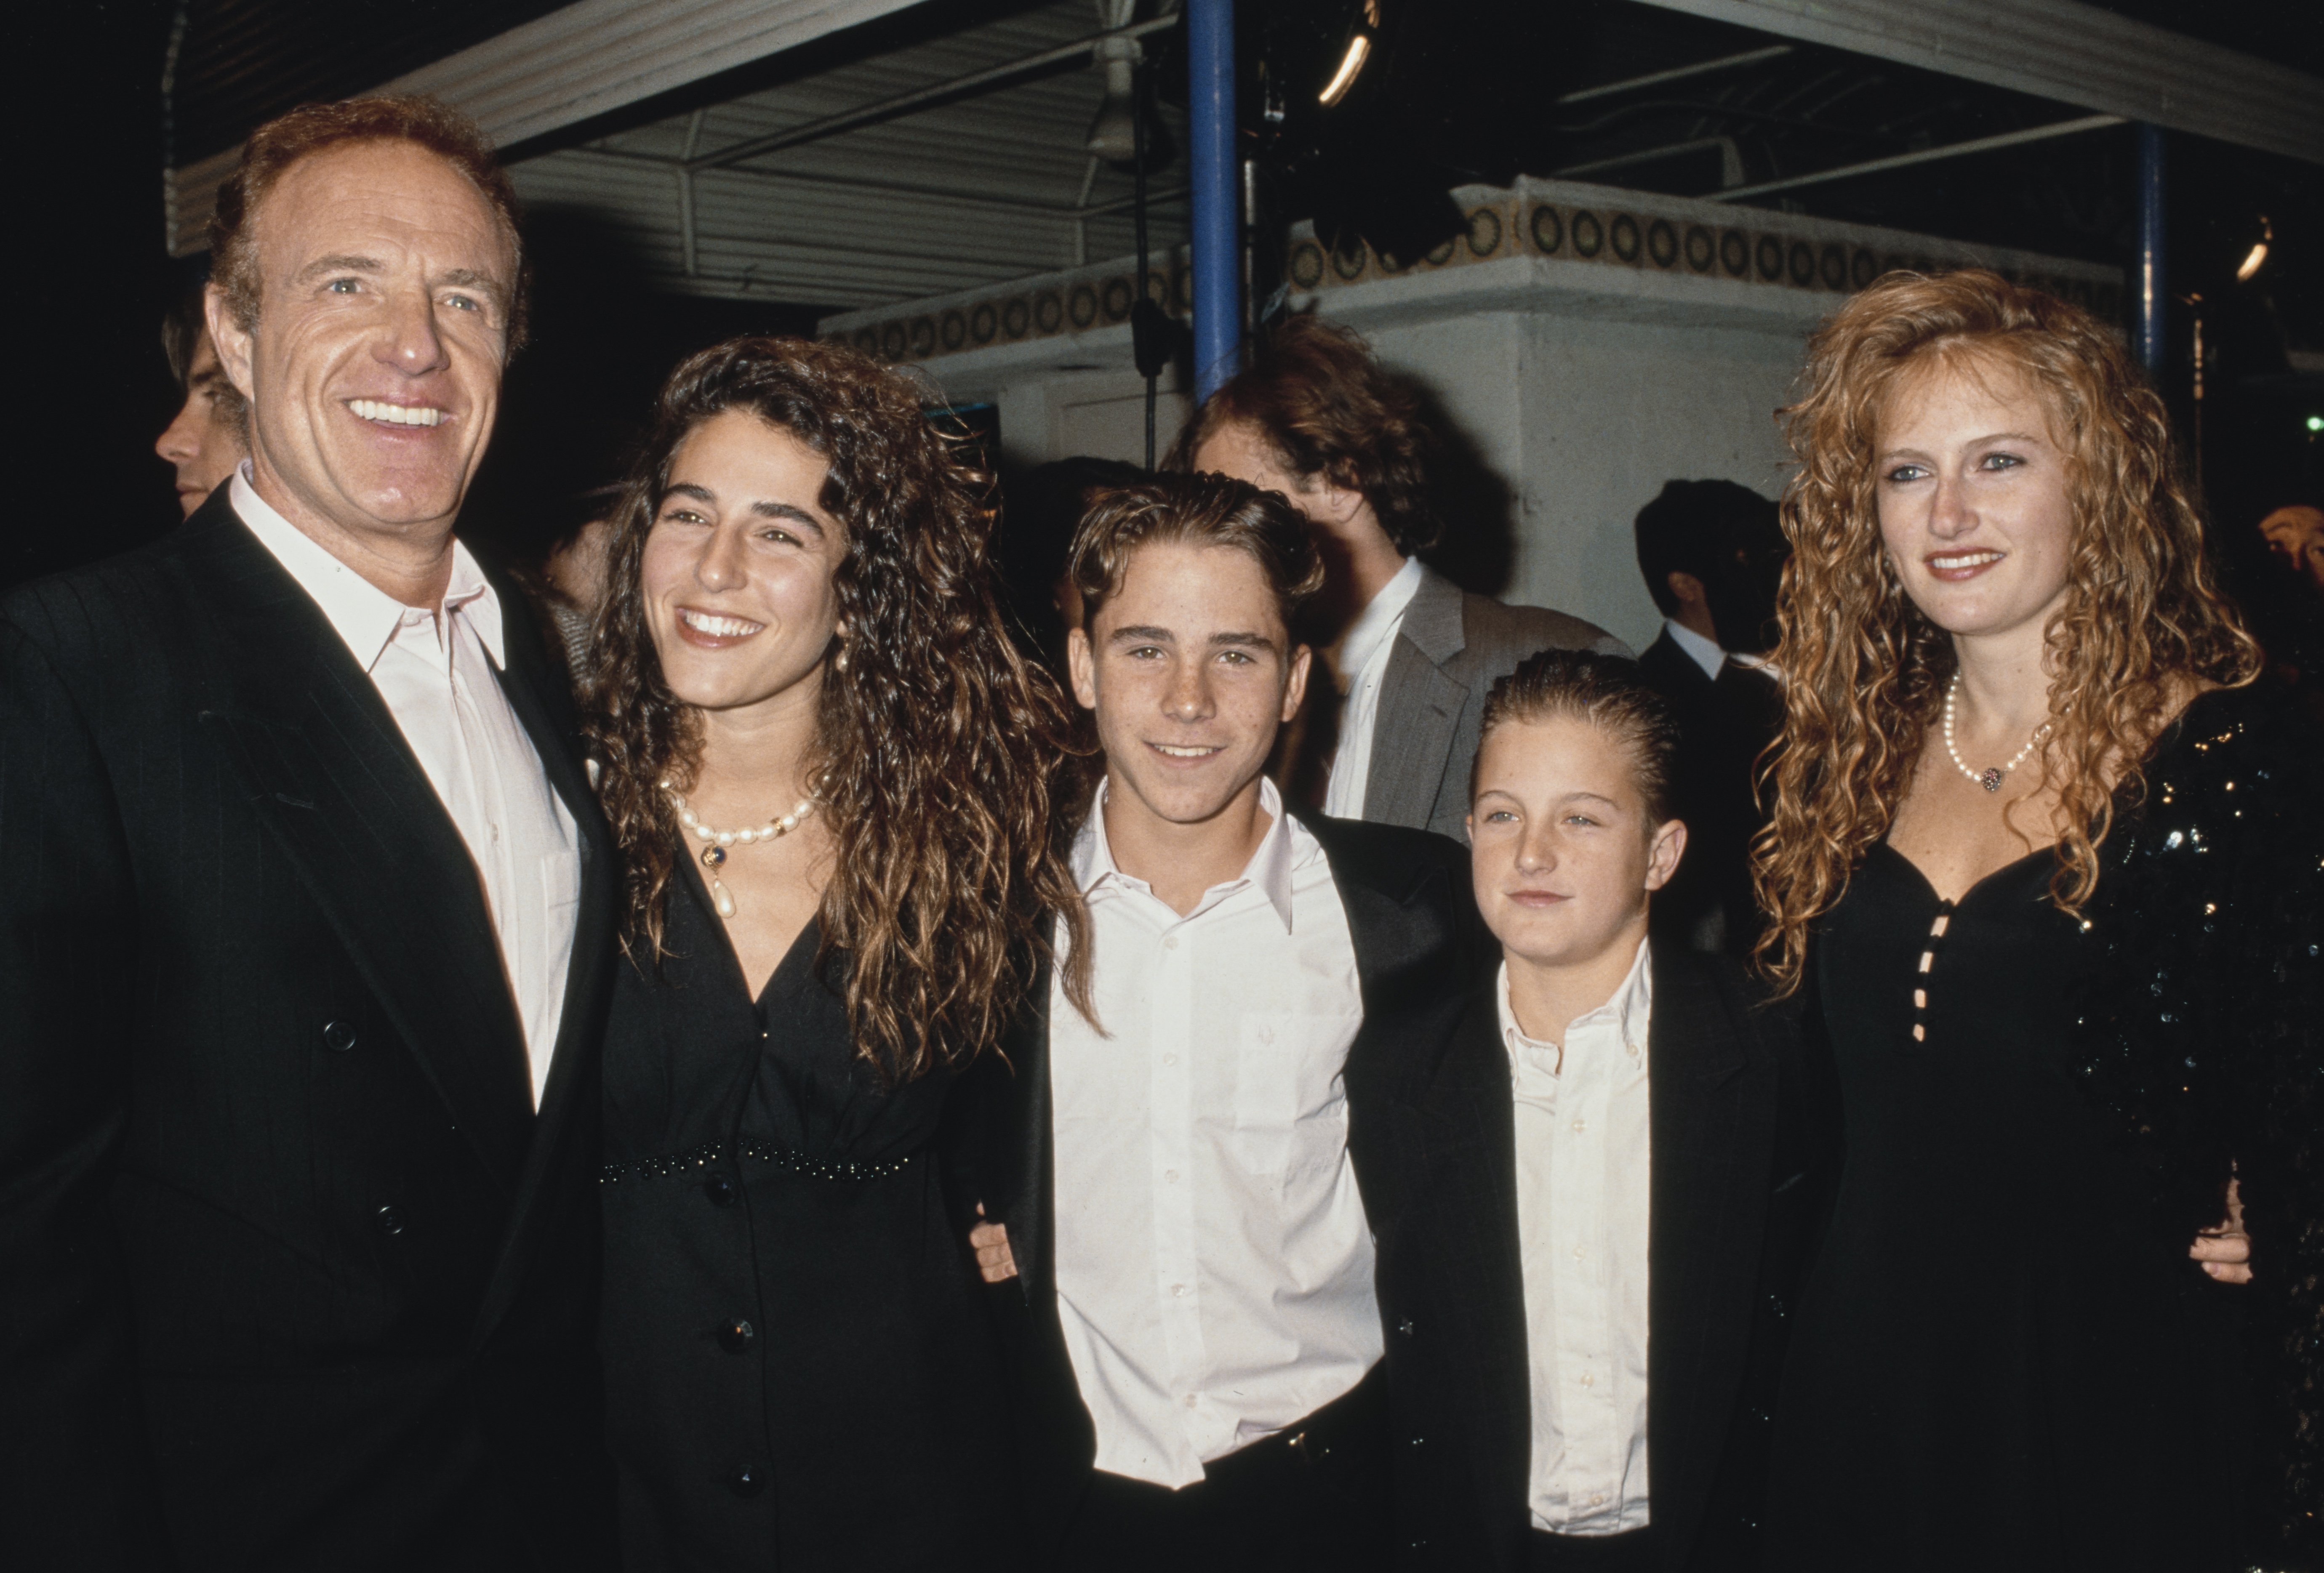 James and Scott Caan with family members at the premiere of "Misery" in Westwood, California, on November 29, 1990. | Source: Getty Images